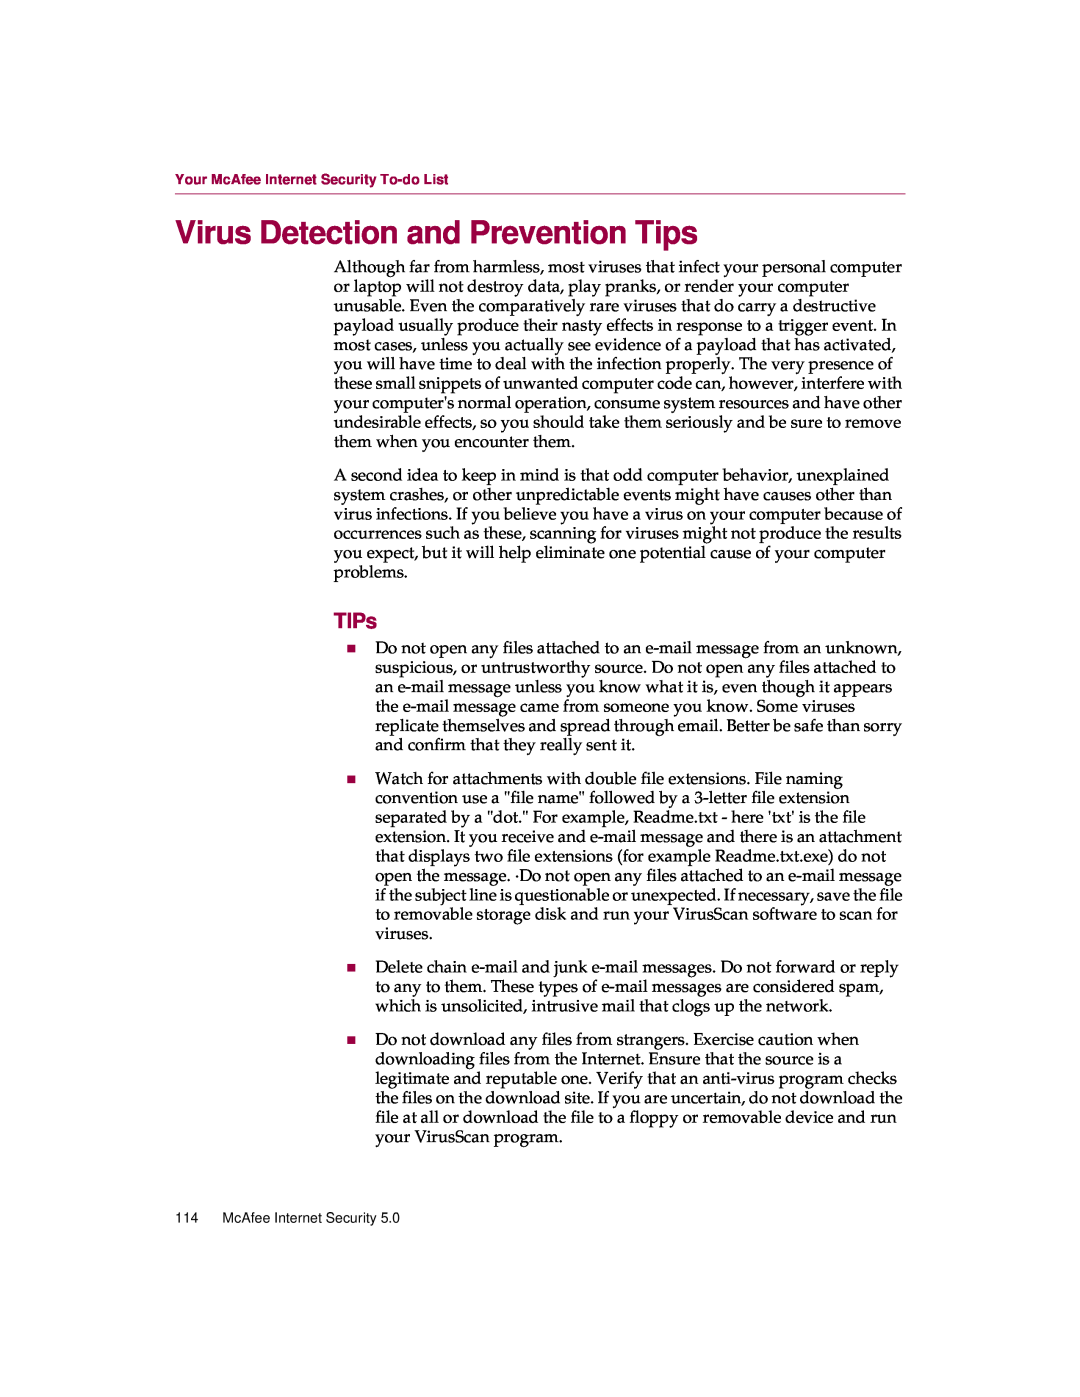 McAfee 5 manual Virus Detection and Prevention Tips, TIPs 